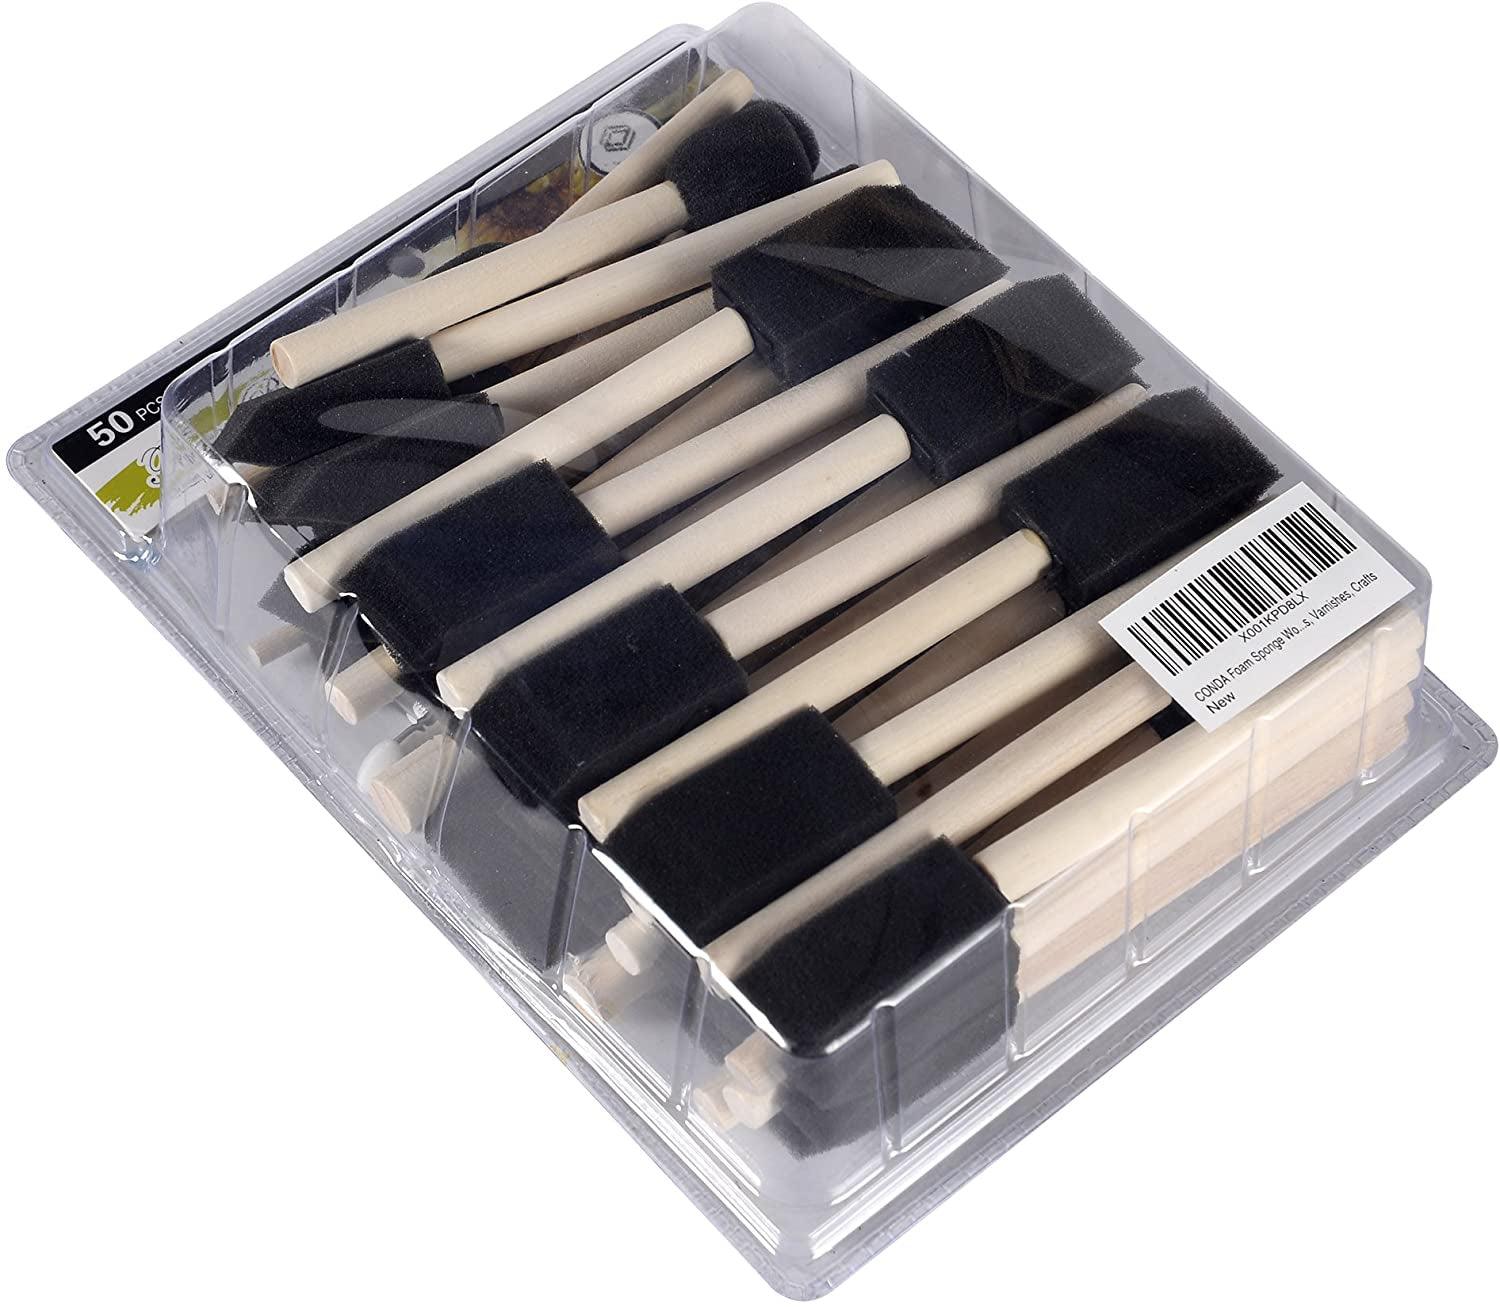 US Art Supply Variety Pack Foam Sponge Wood Handle Paint Brush Set (Value  Pack of 40 Brushes) - Lightweight, Durable and Great for Acrylics, Stains